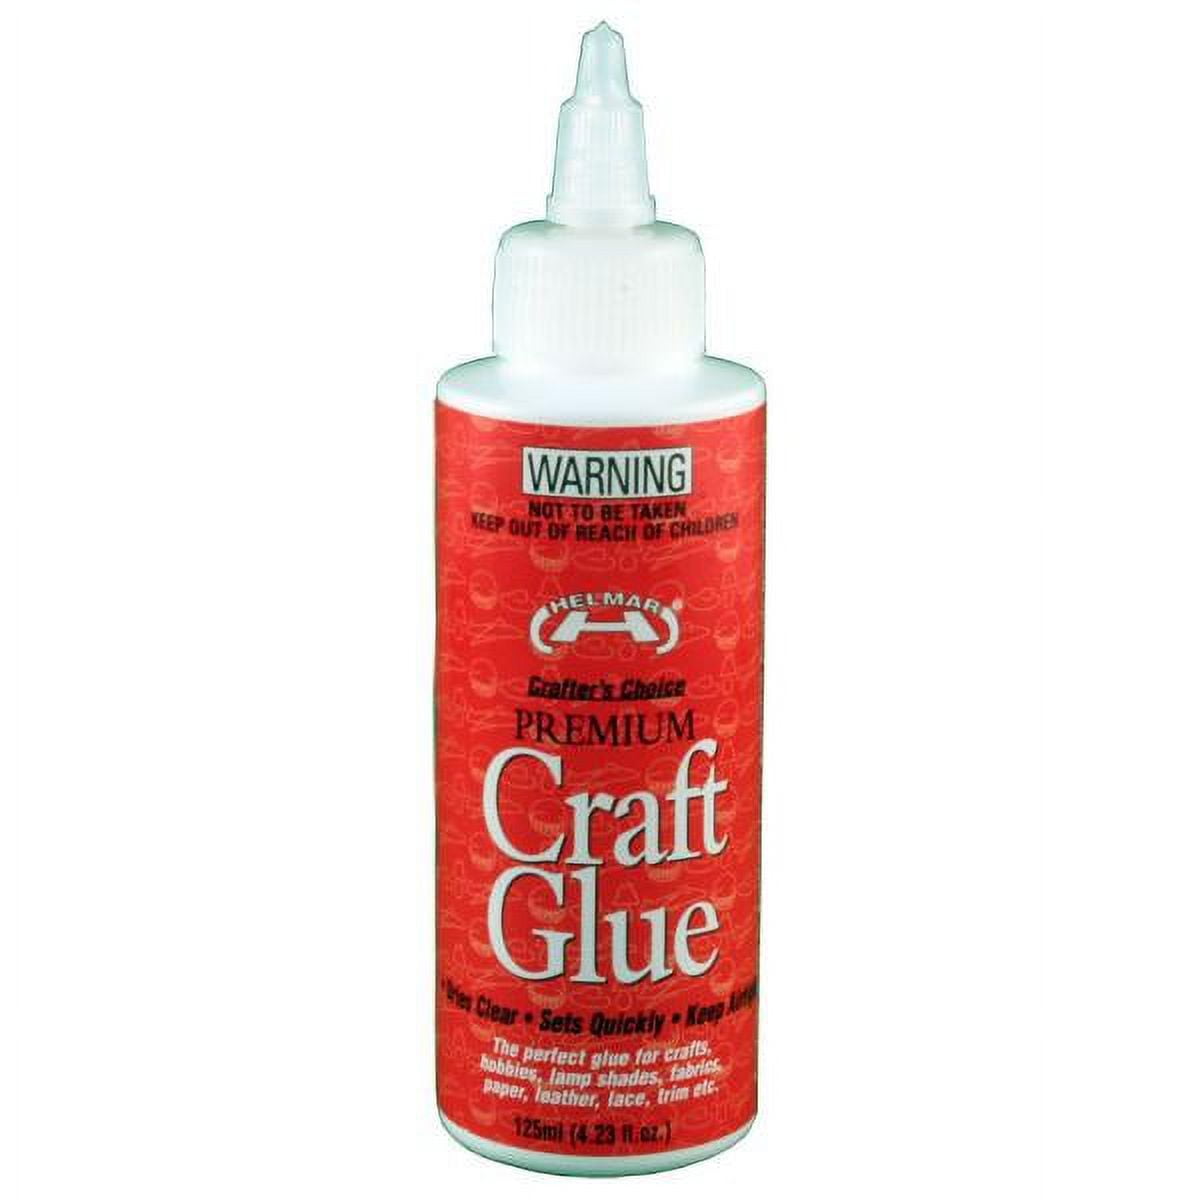 Sulyn Extra Fine Glitter for Crafts, Ruby Red, 2.5 oz